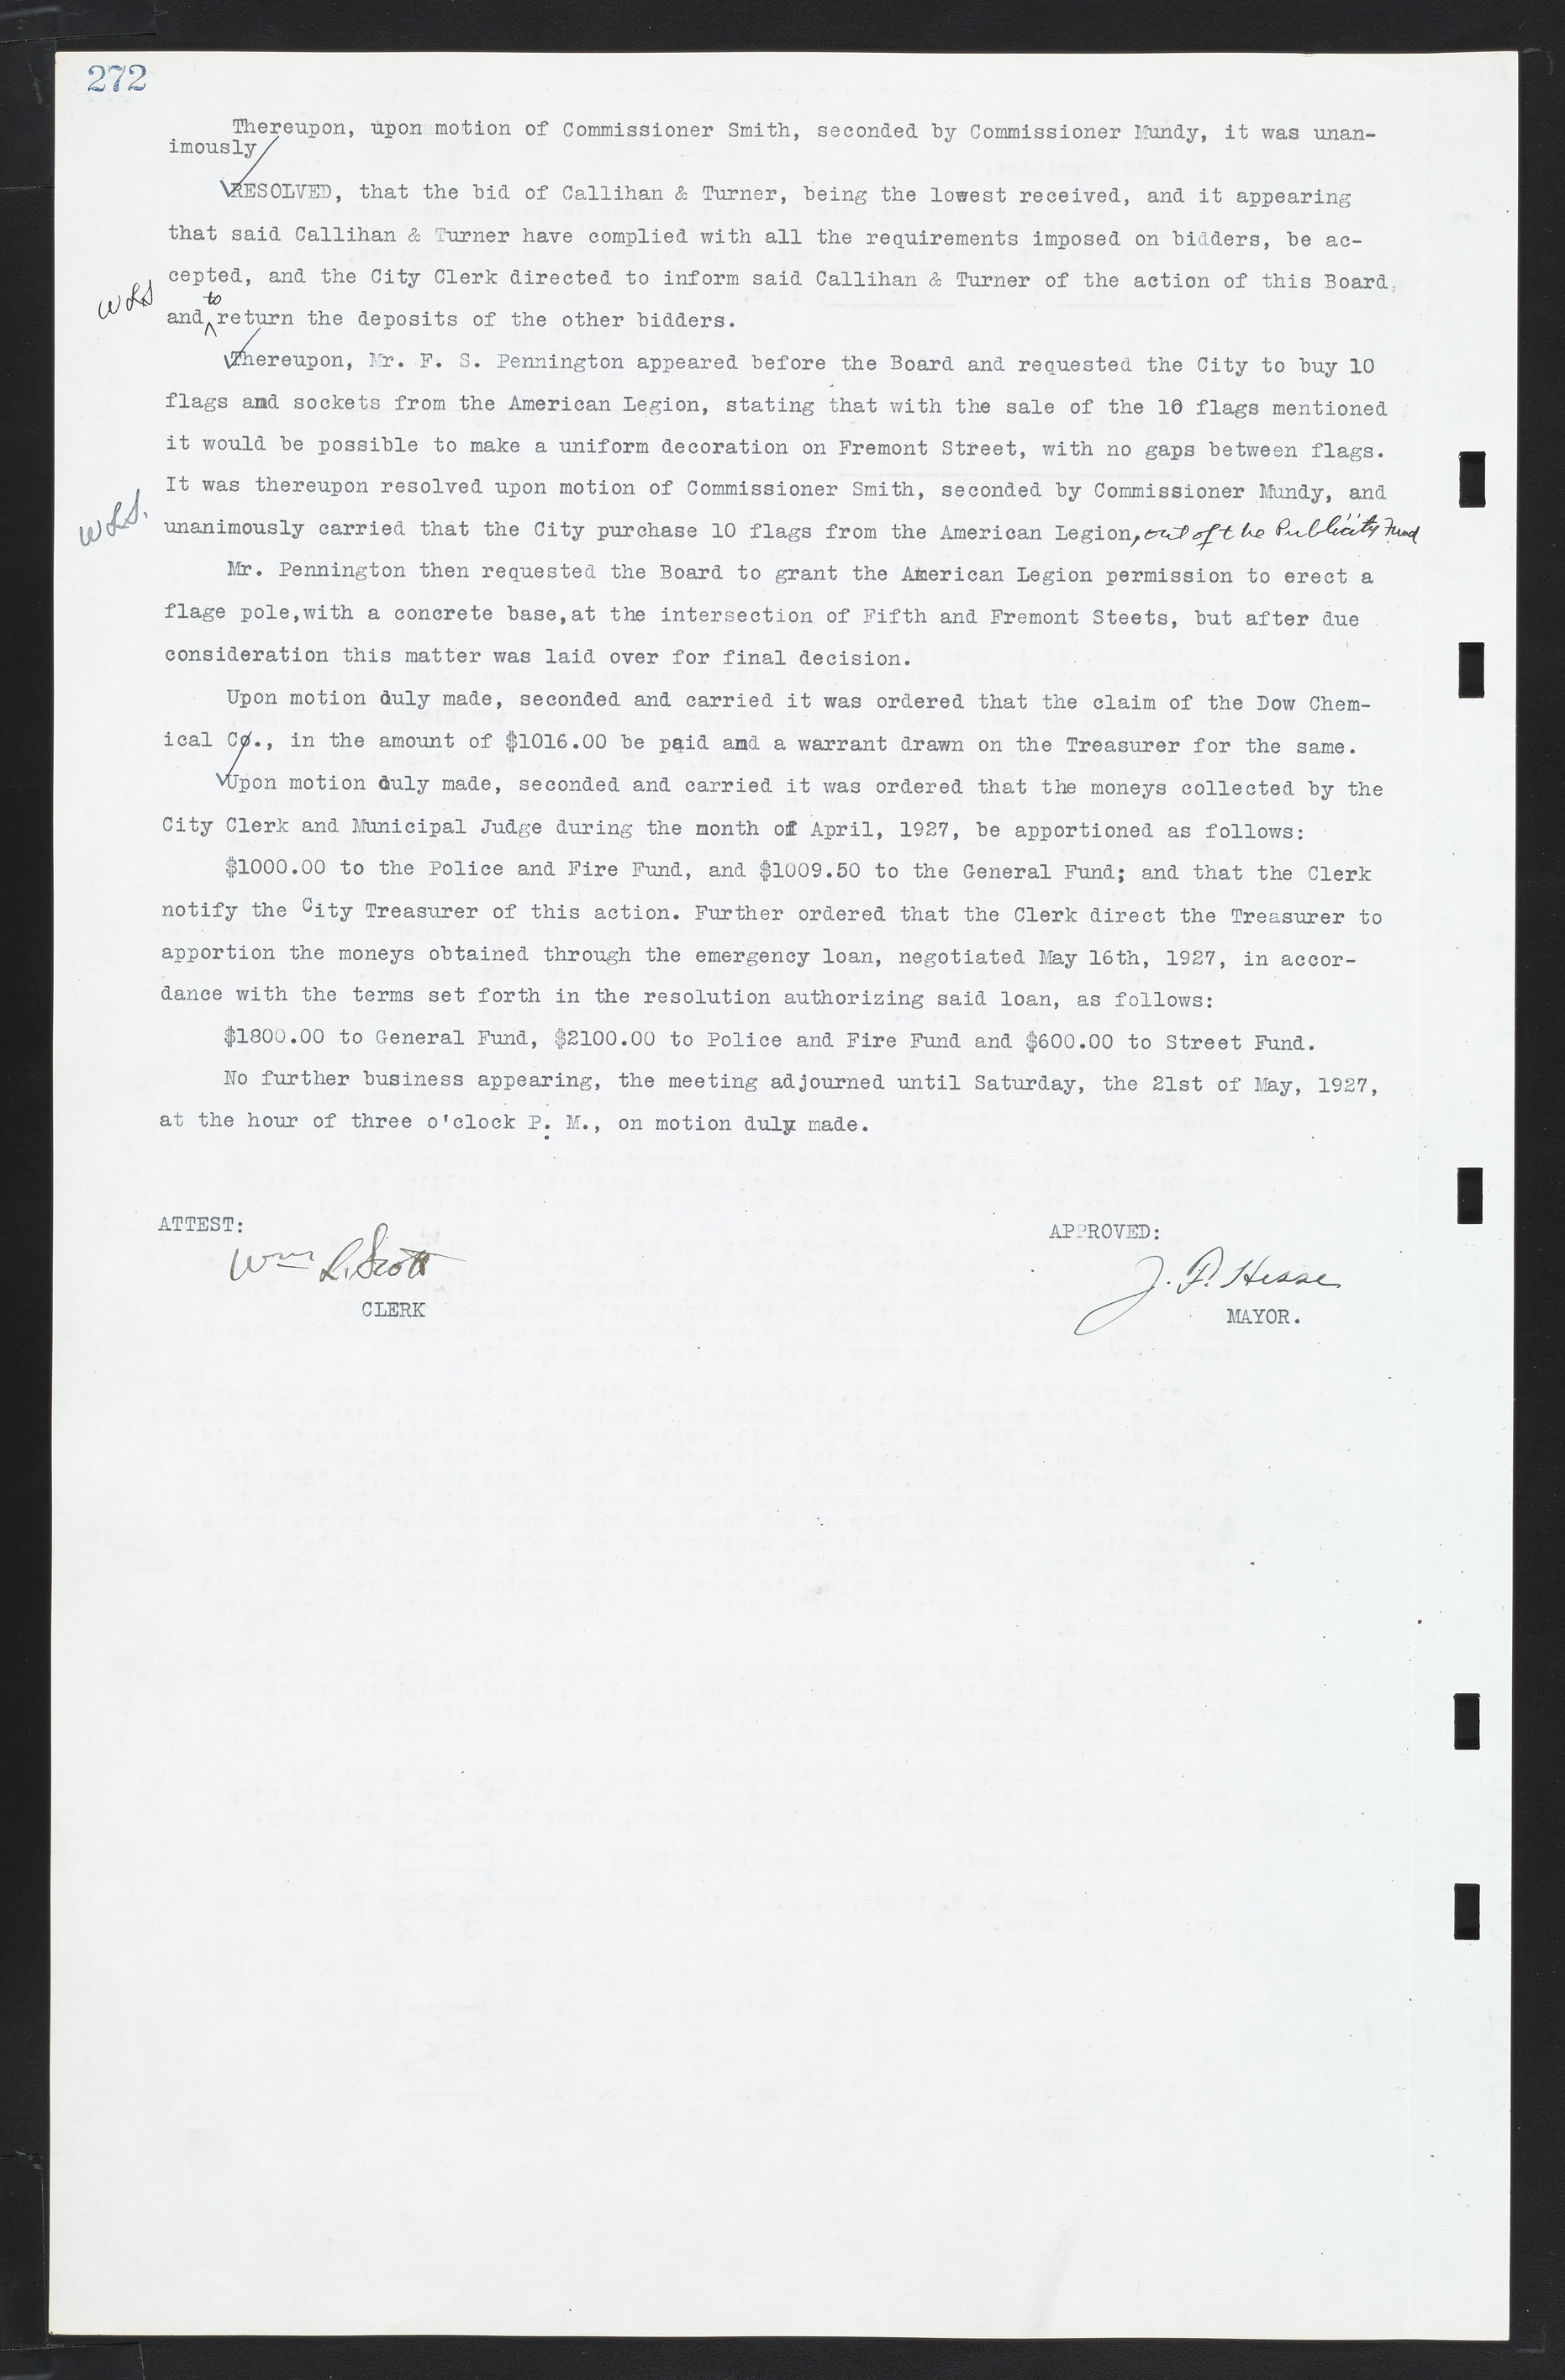 Las Vegas City Commission Minutes, March 1, 1922 to May 10, 1929, lvc000002-281